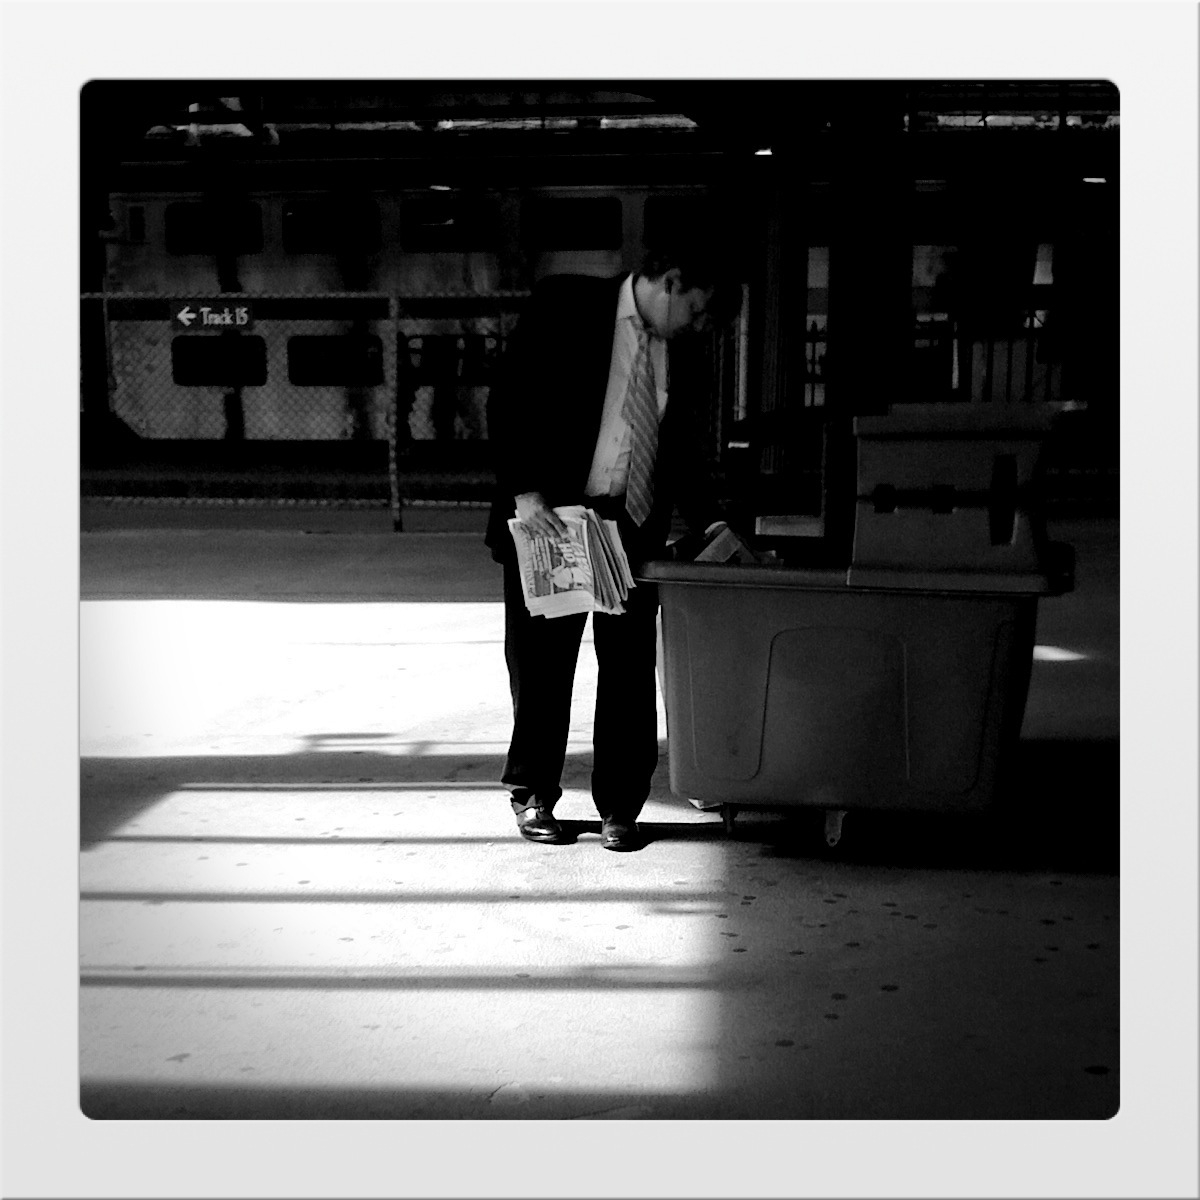 an older man standing in a station waiting for passengers to board